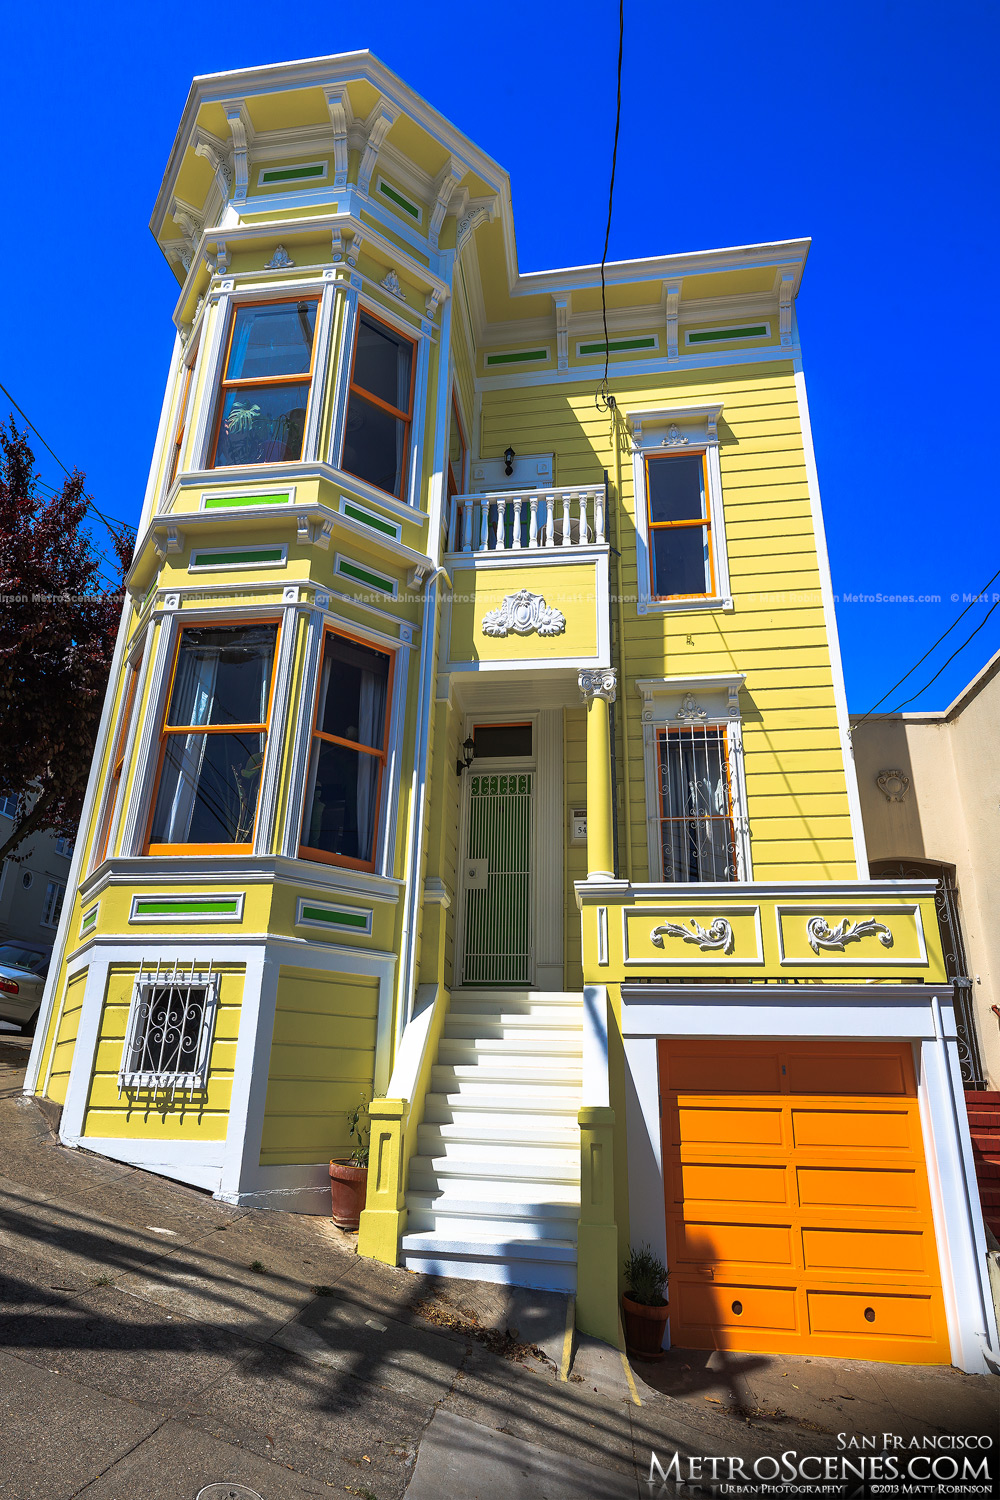 Colorful Yellow, Orange and Green house in San Francisco